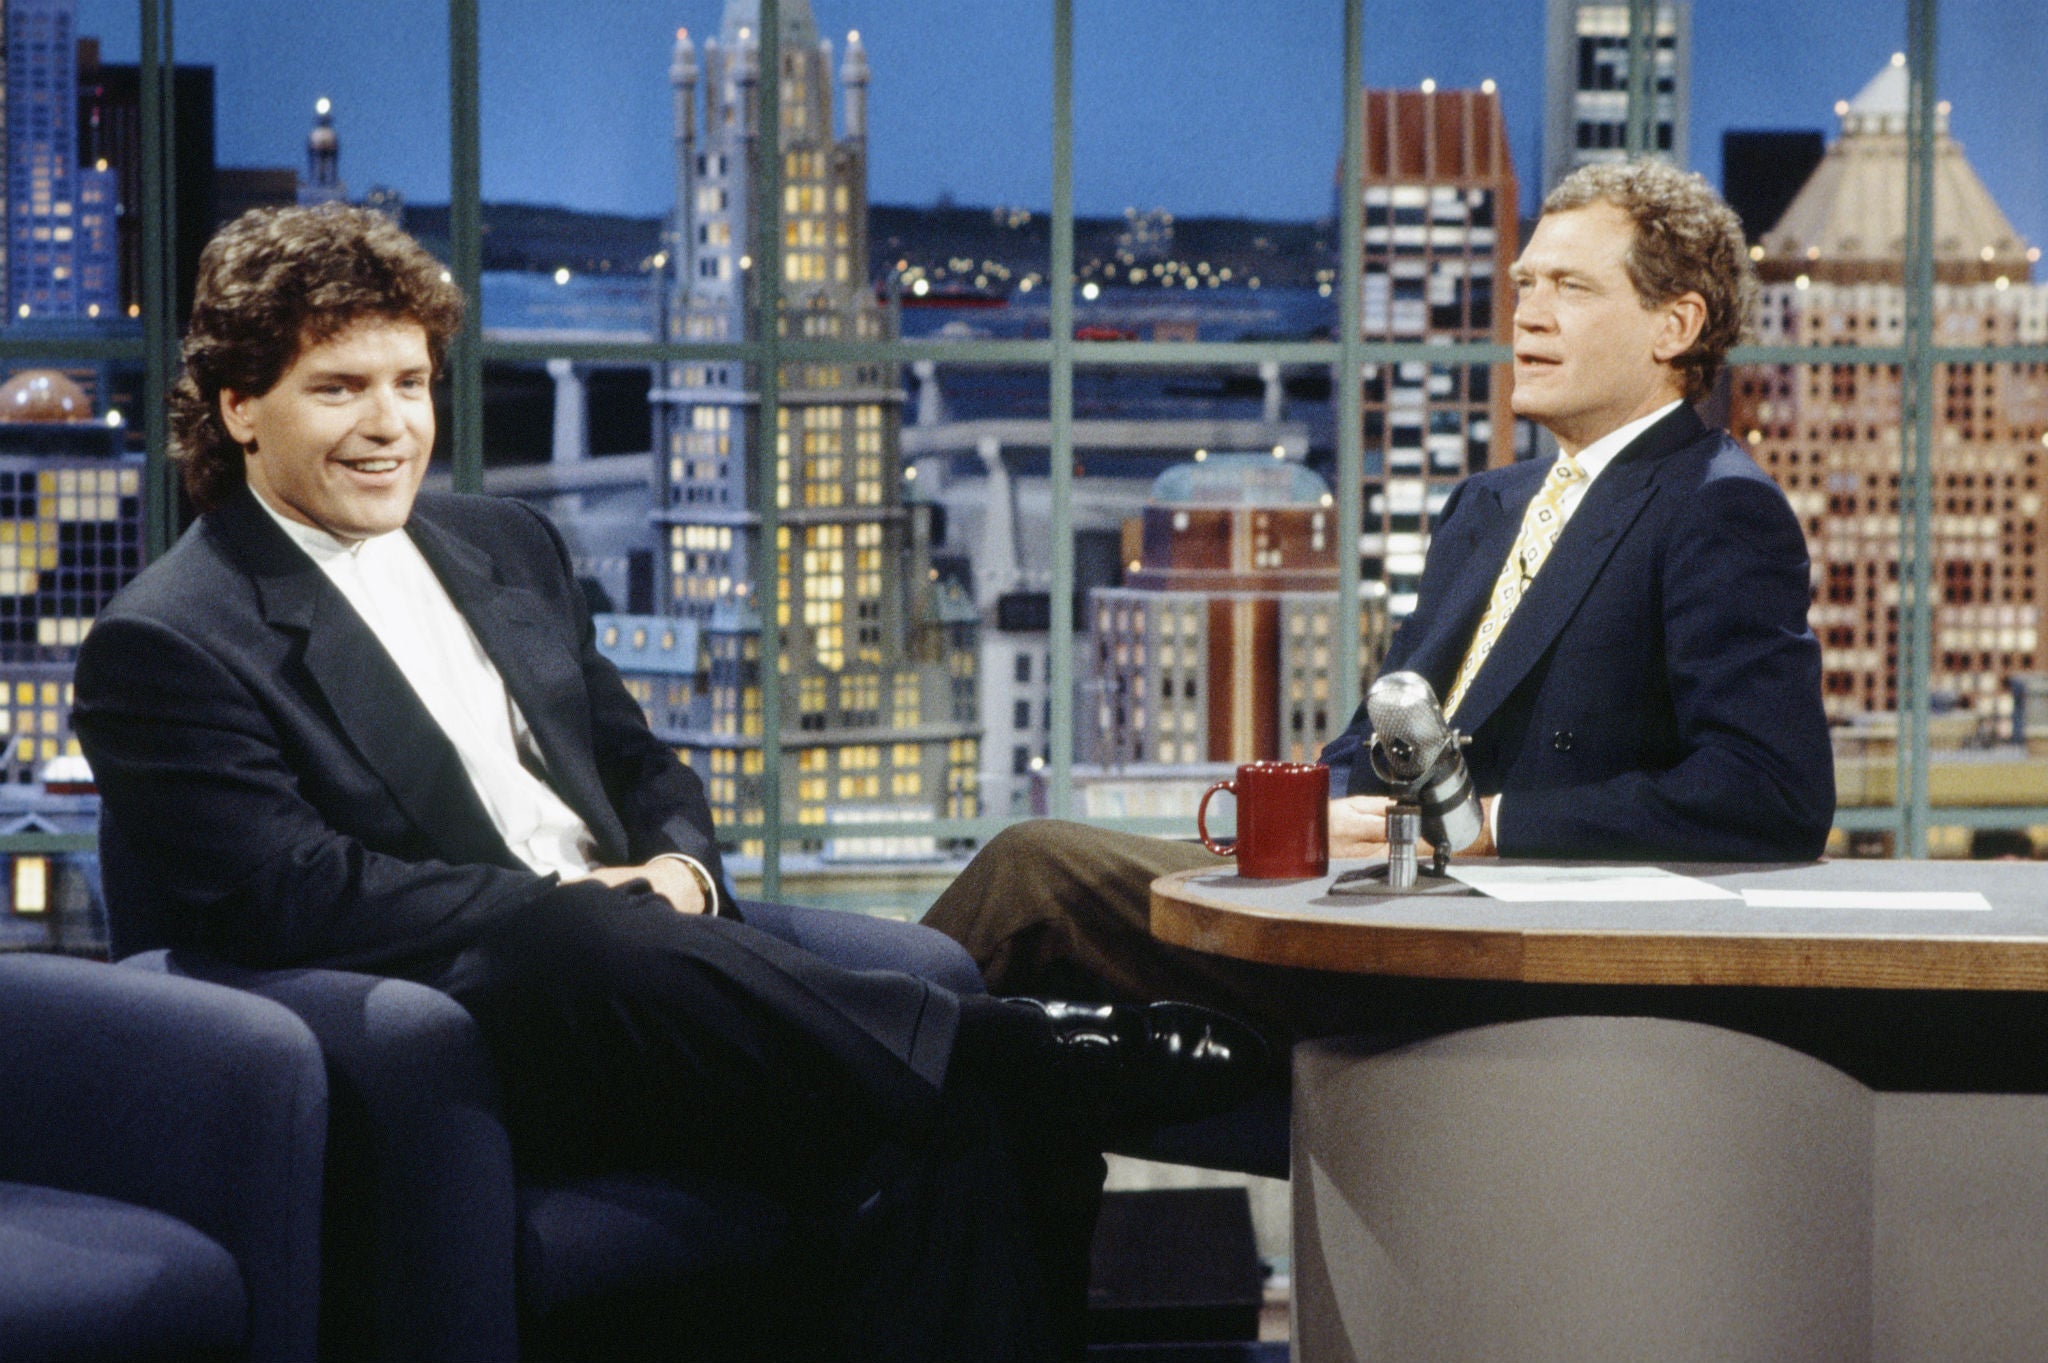 Roger Clinton (left) appears on The Late Show with David Letterman in 1993, shortly after his half-brother Bill took office